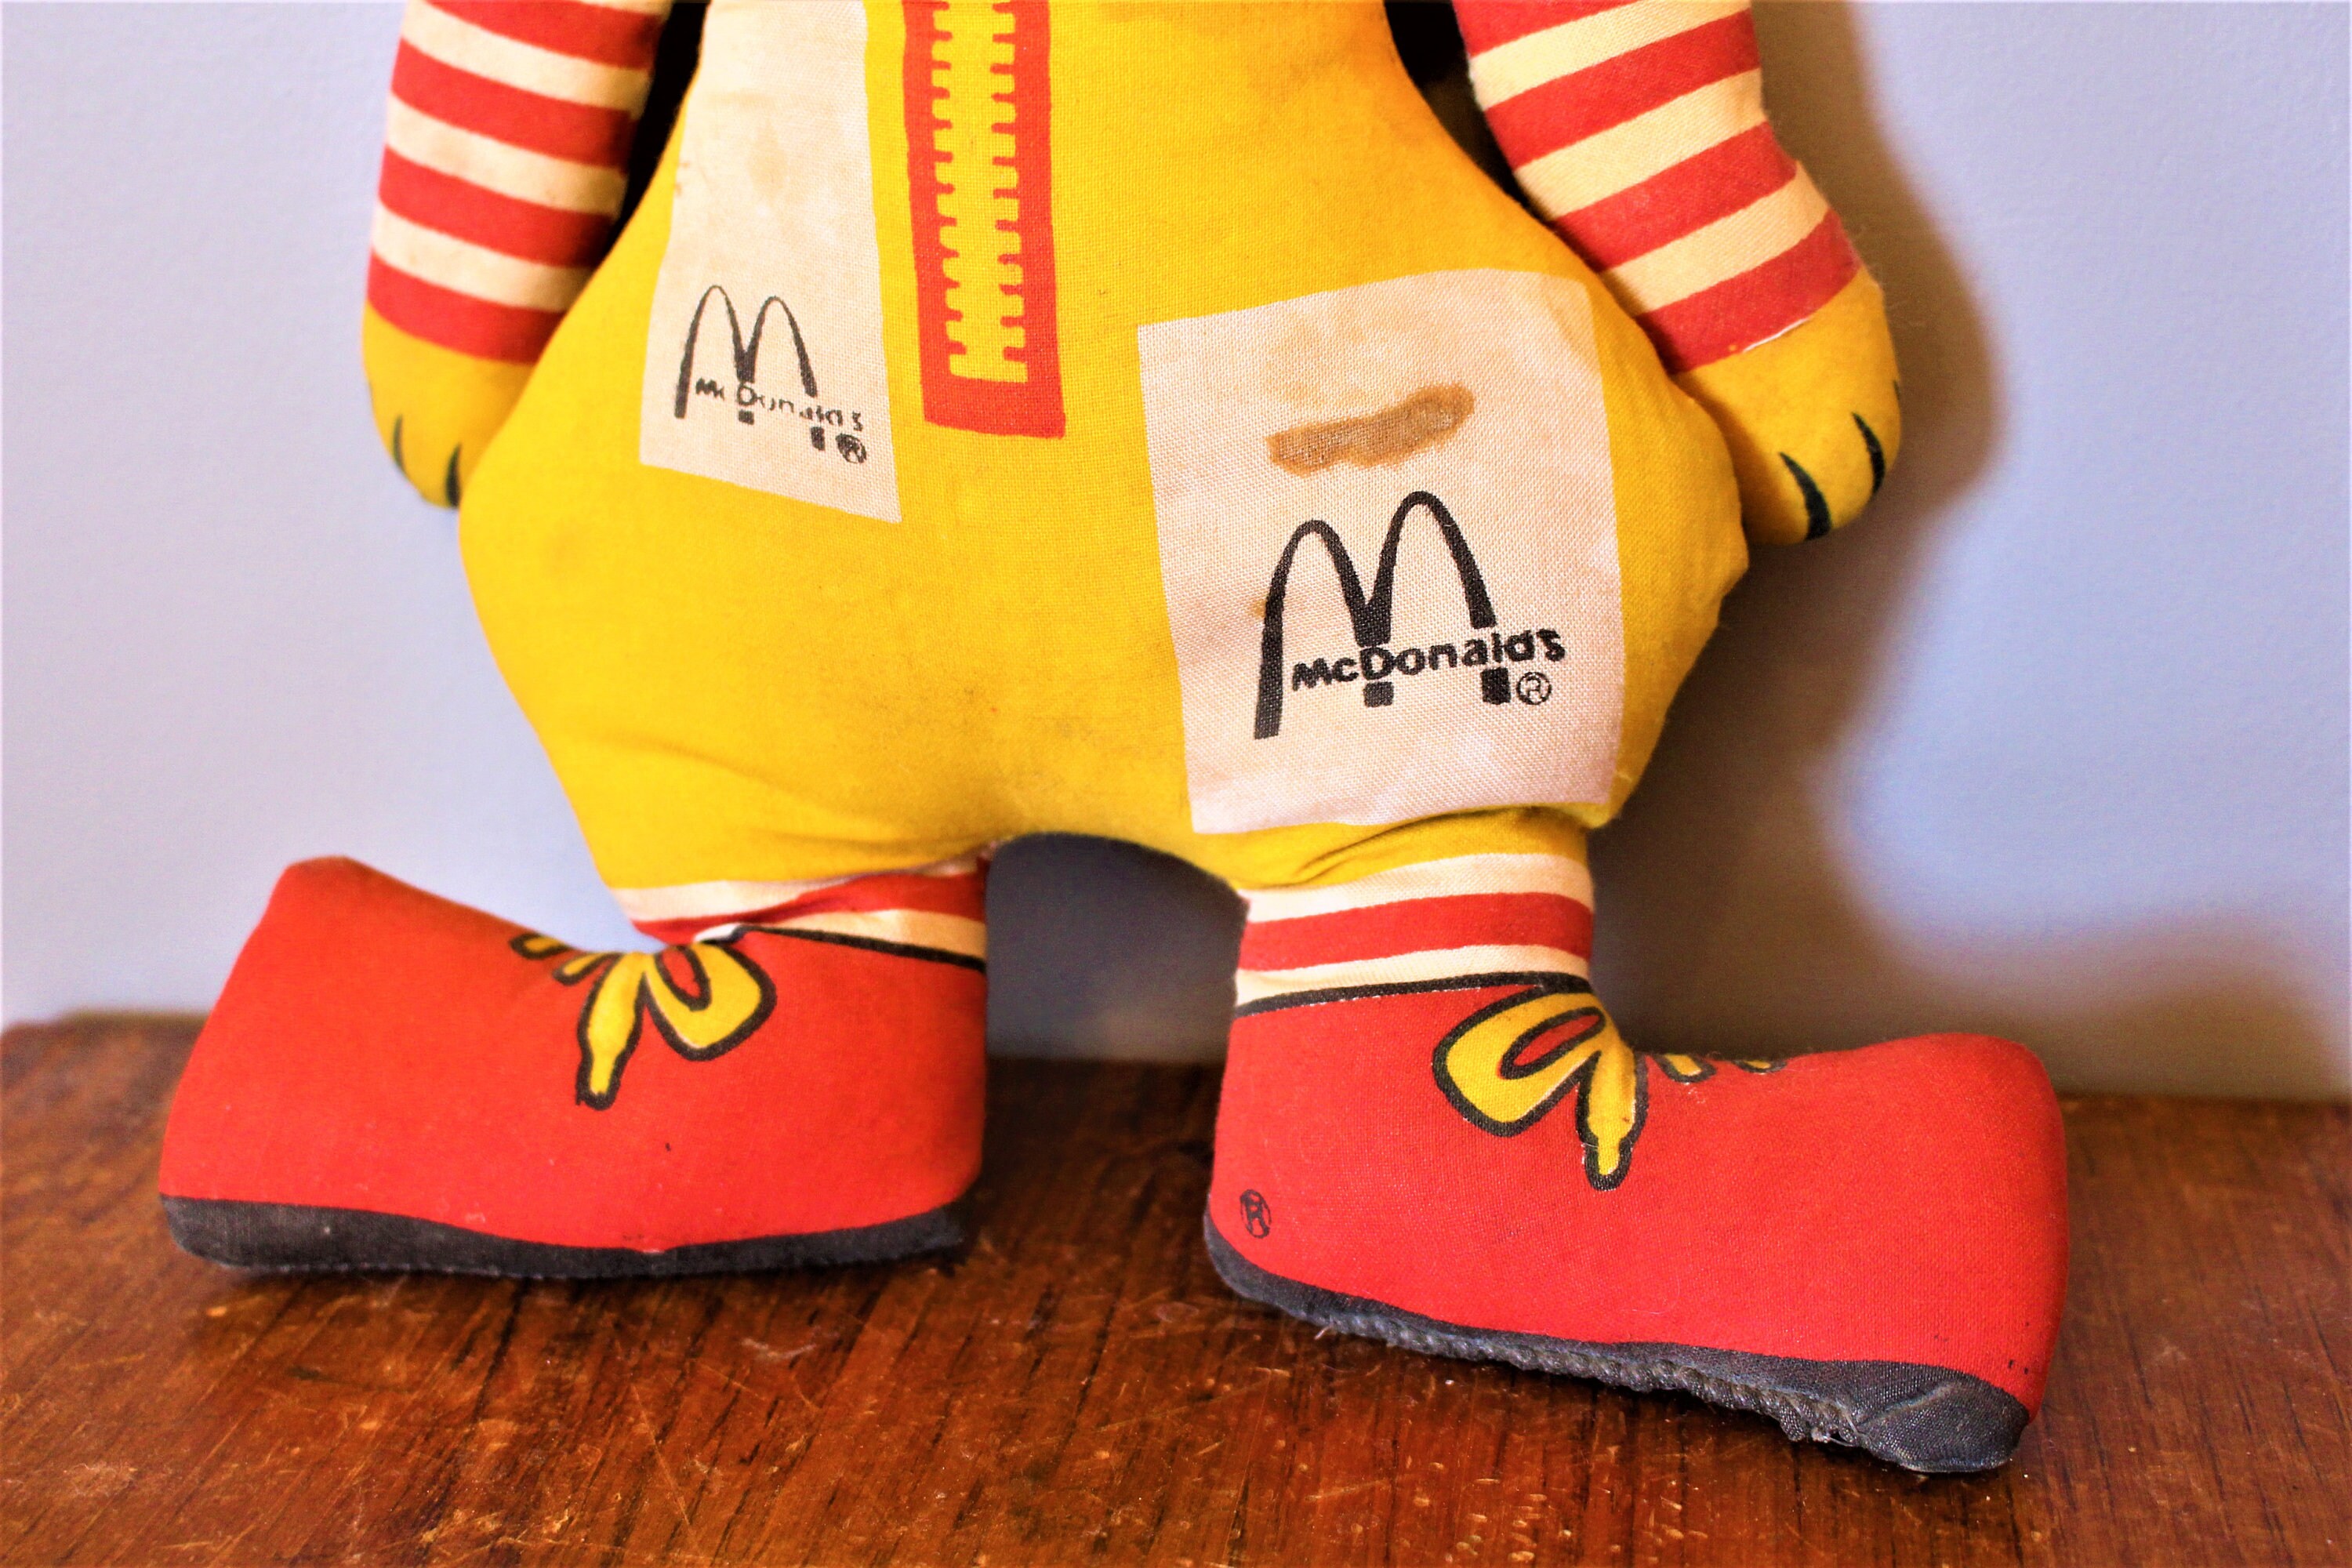 McDonald's Toy Ad Mascot 1970's Style Ronald McDonald Vintage McDonald's Creepy Clowns McDonald's Doll Old Clowns Plush Toy